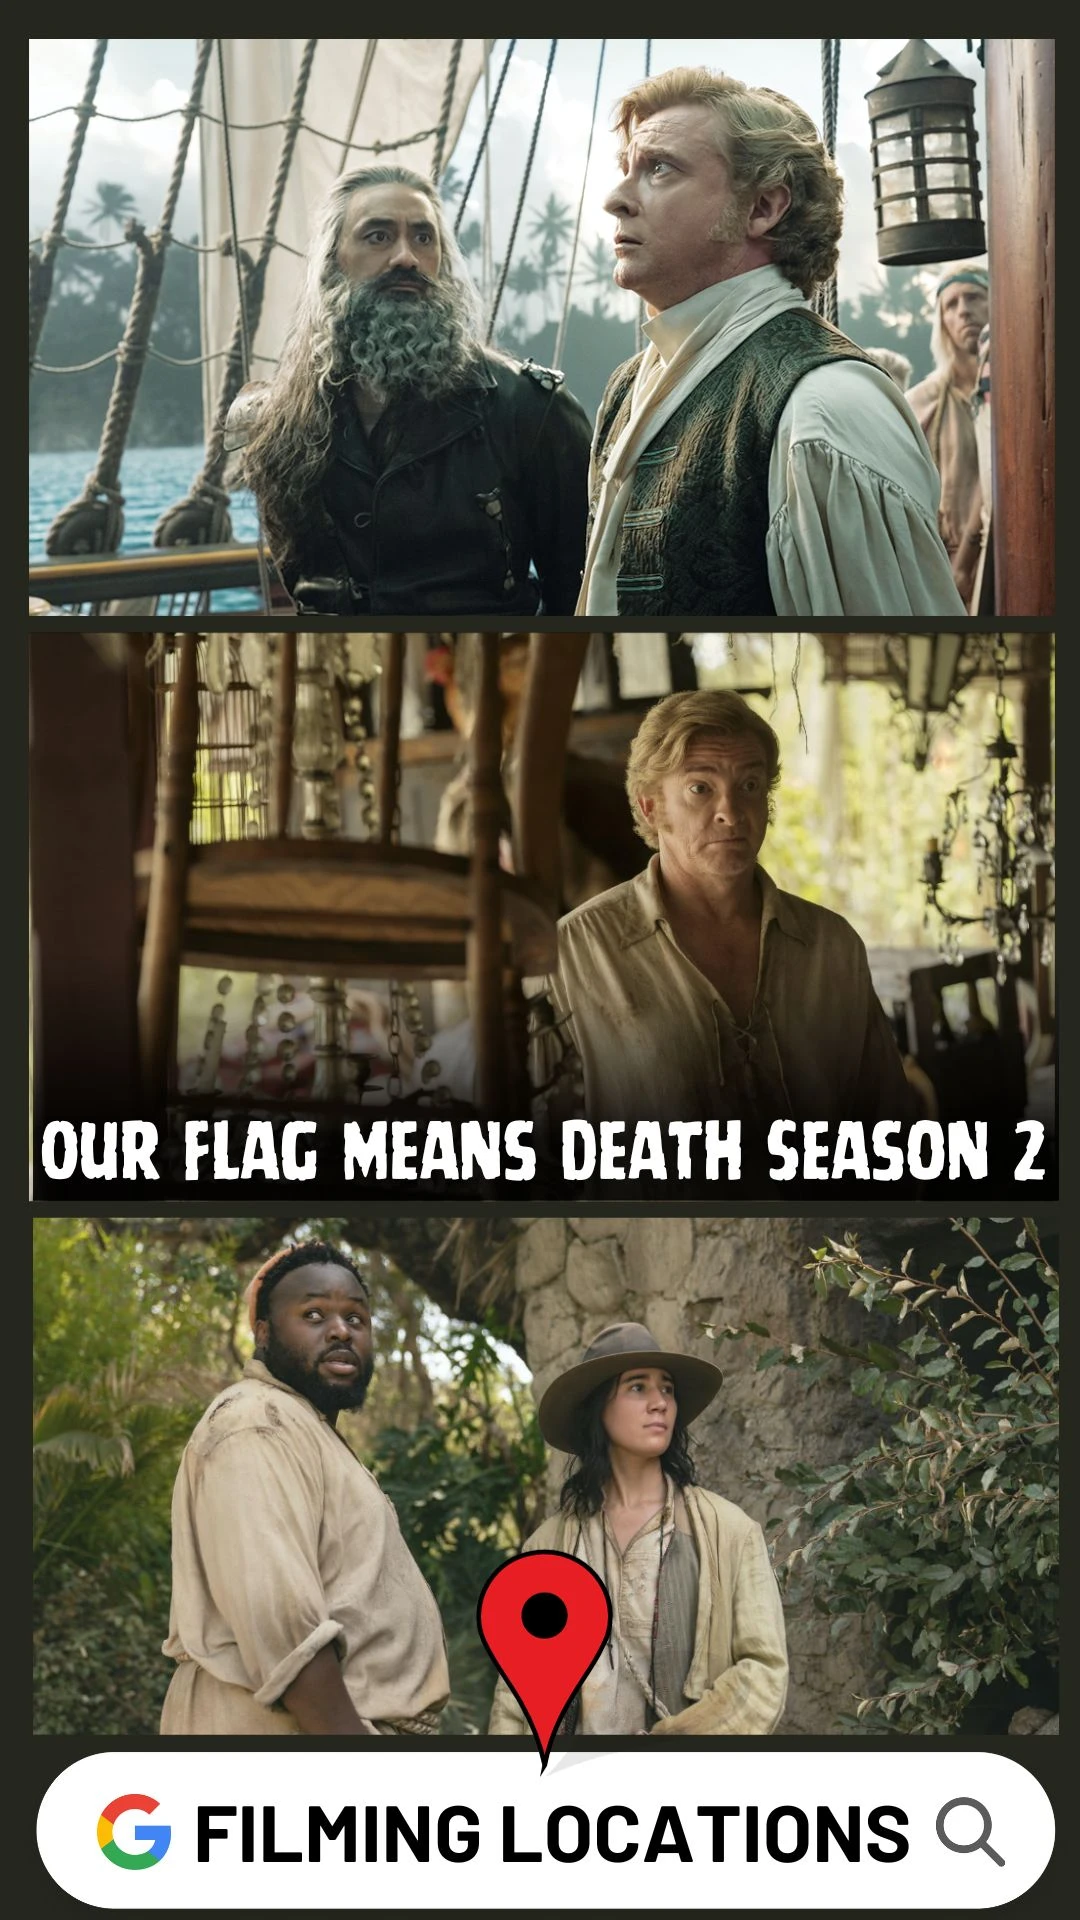 Our Flag Means Death Season 2 Filming Locations